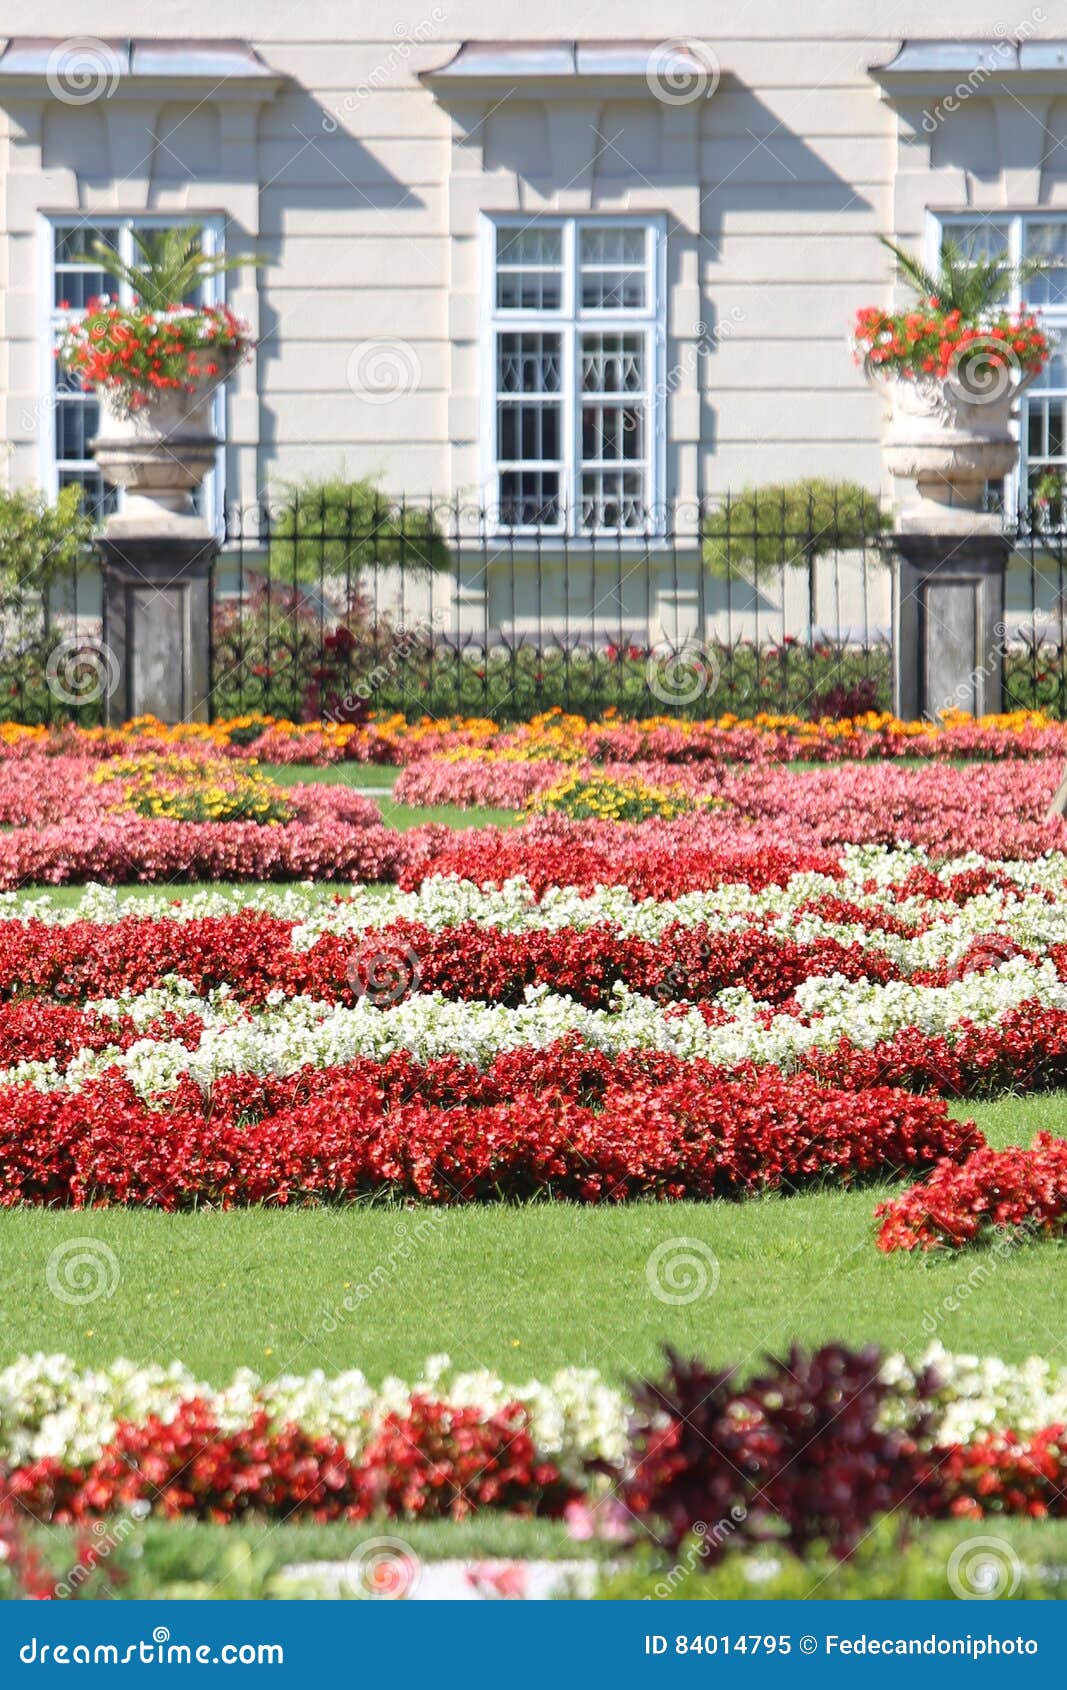 garden with many flower beds in a european park